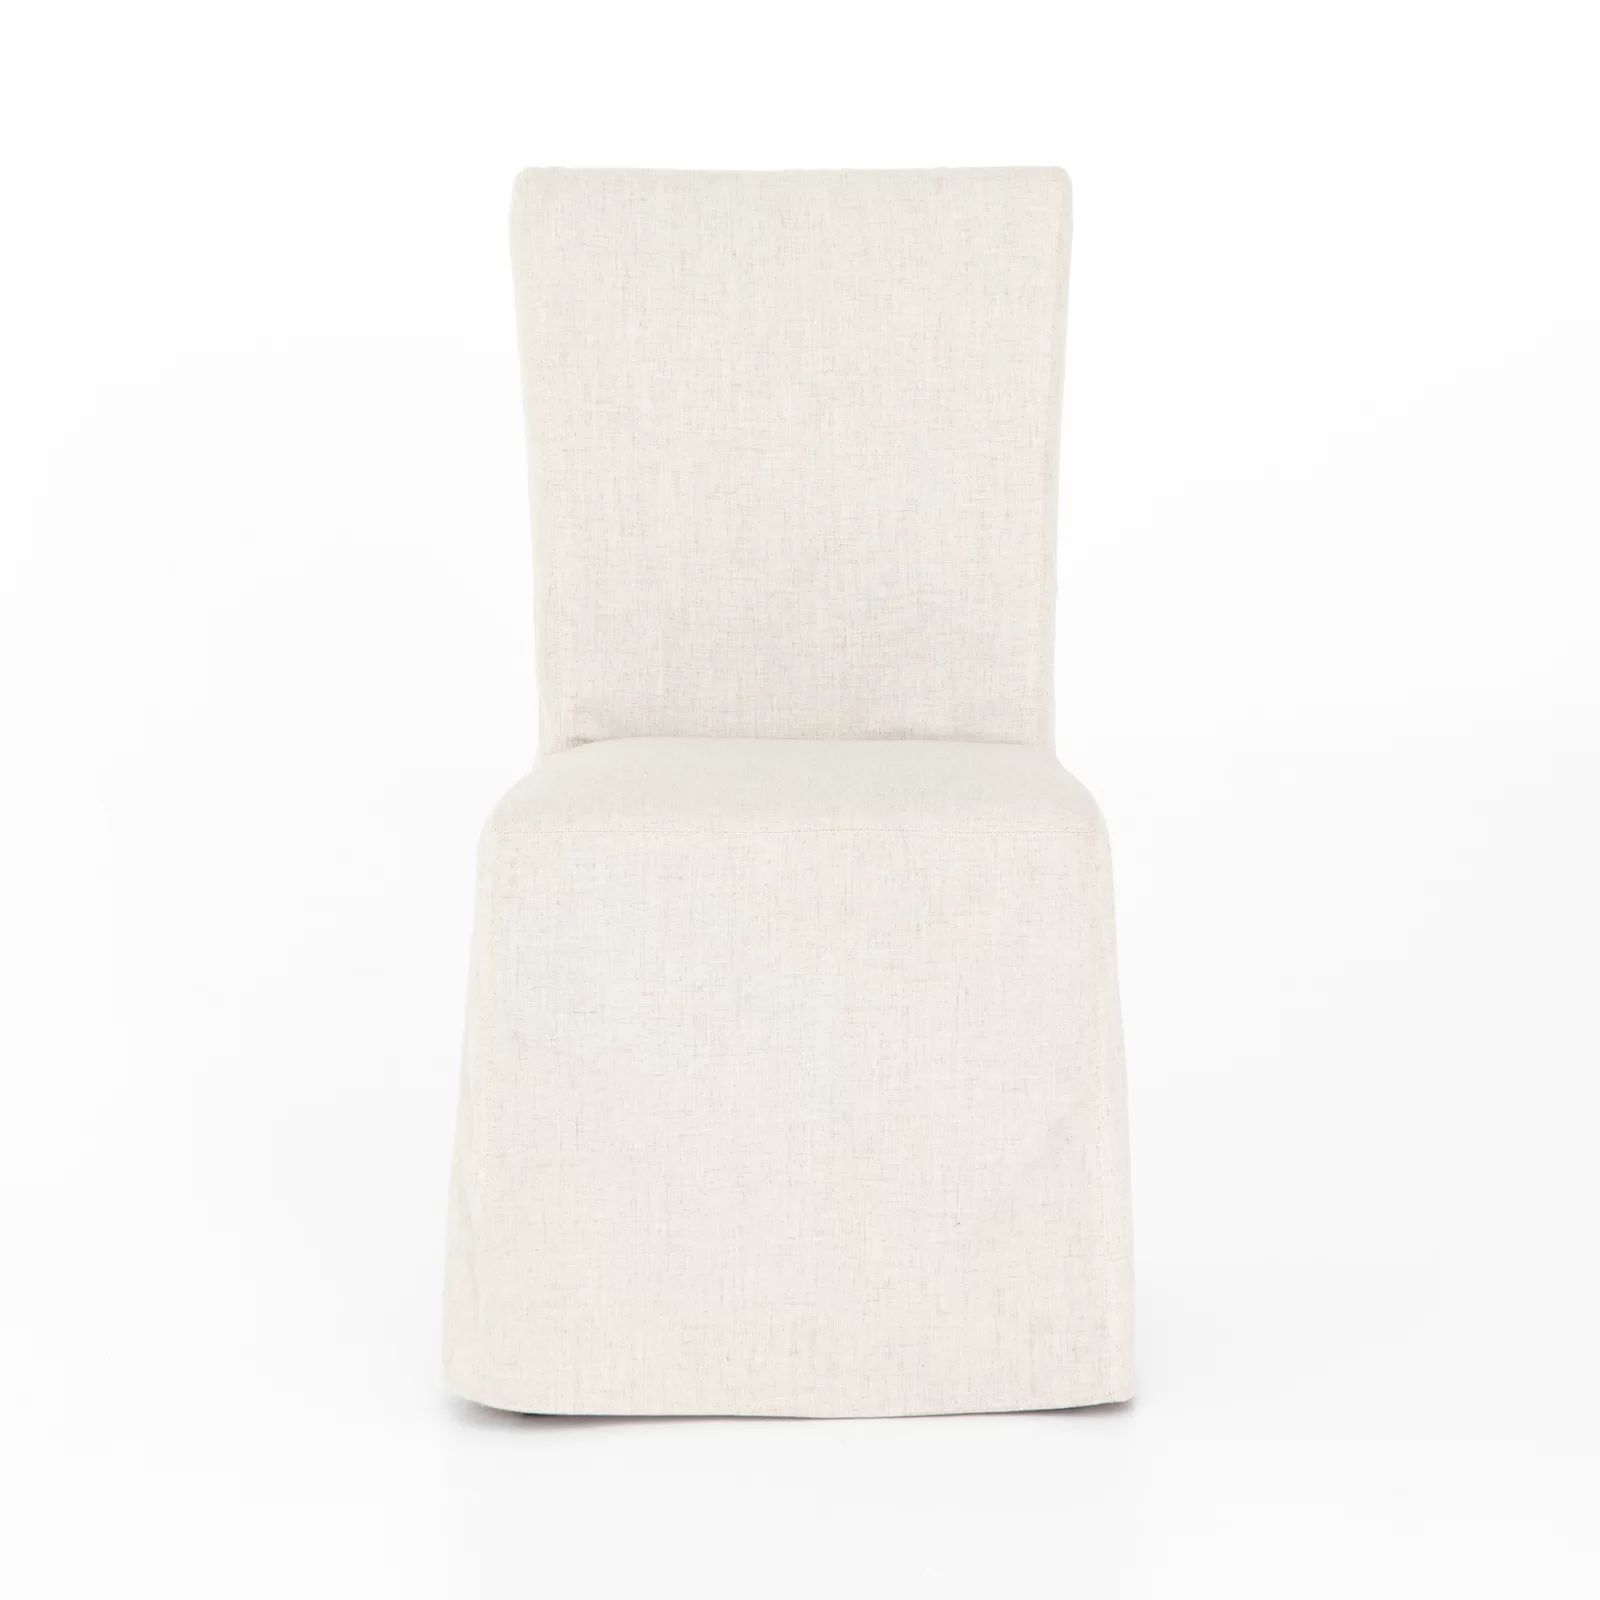 Callie Upholstered Parsons Chair in Savile Flax | Wayfair North America